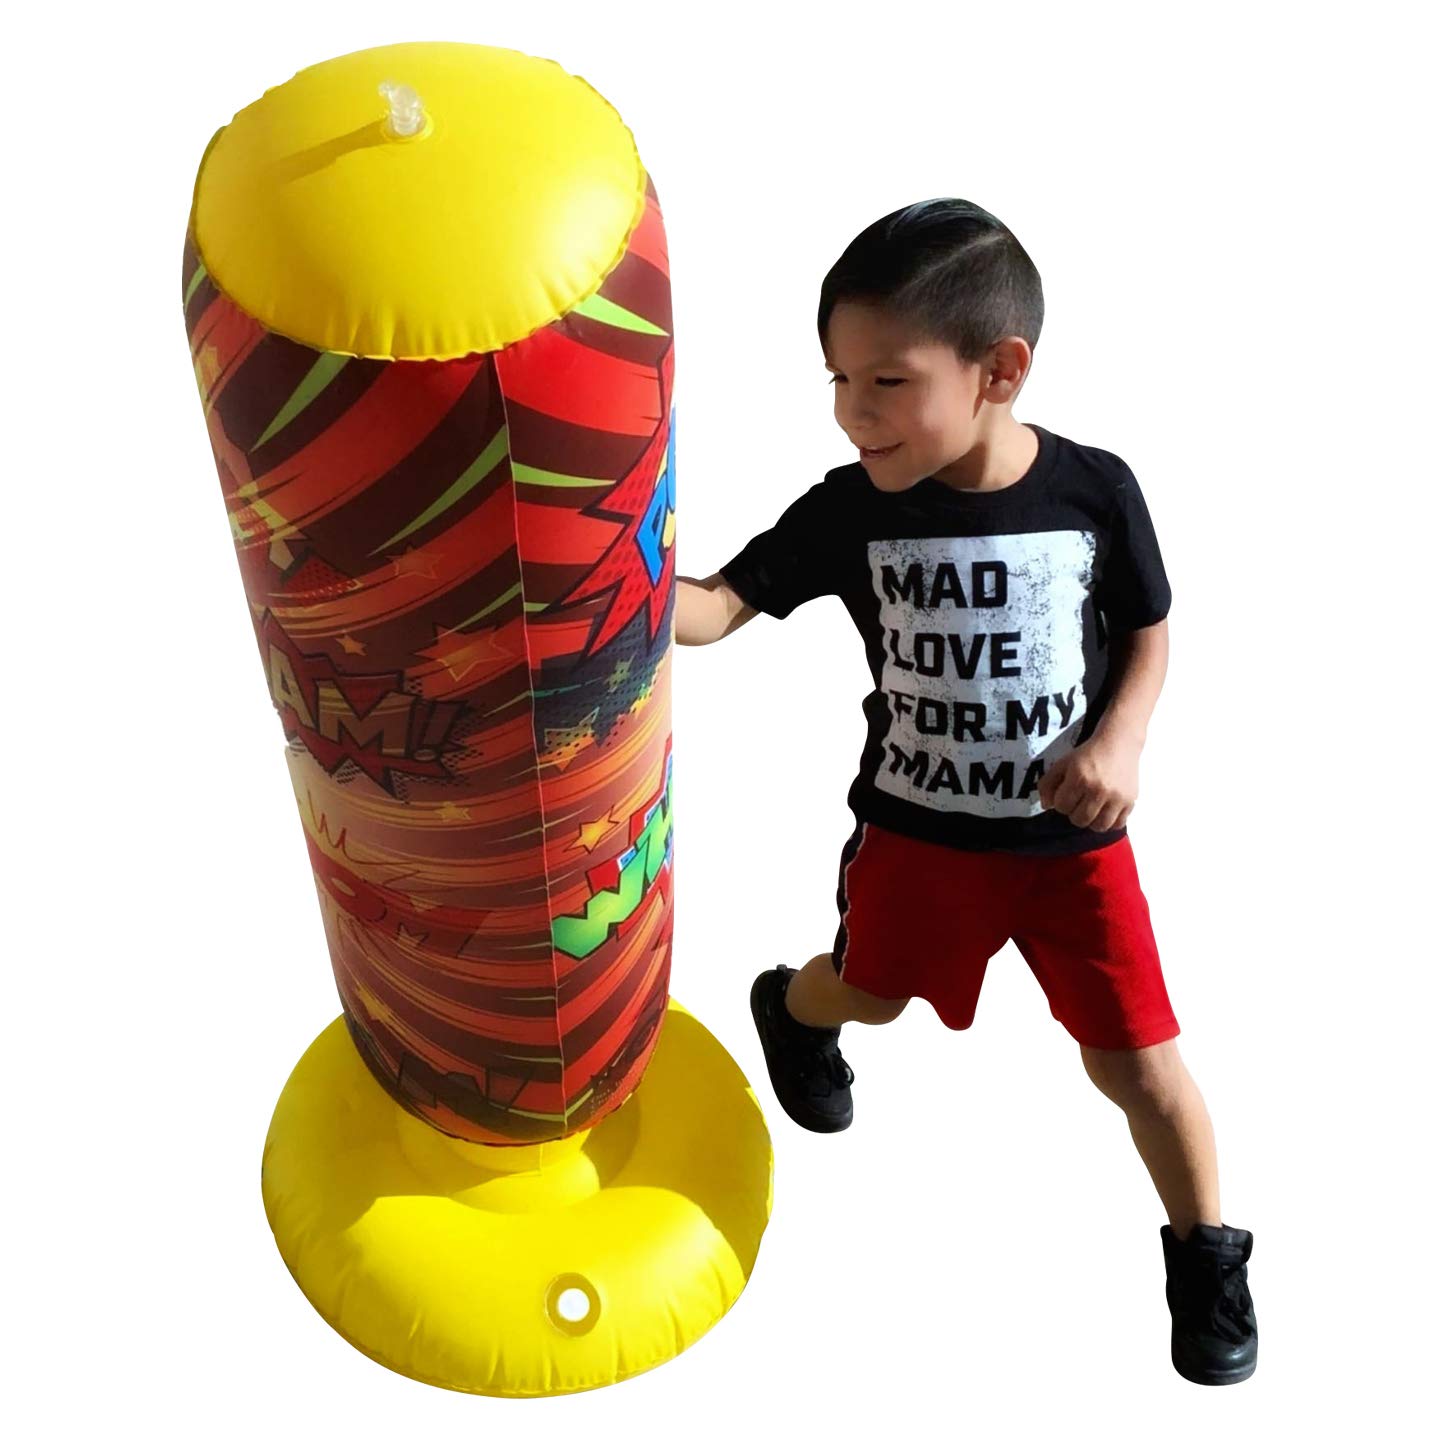 Book Cover Children’s Punching Bag Bounce Back Free Standing Punching Bag Great for Karate or Martial Arts Practice and Hyper Active Children